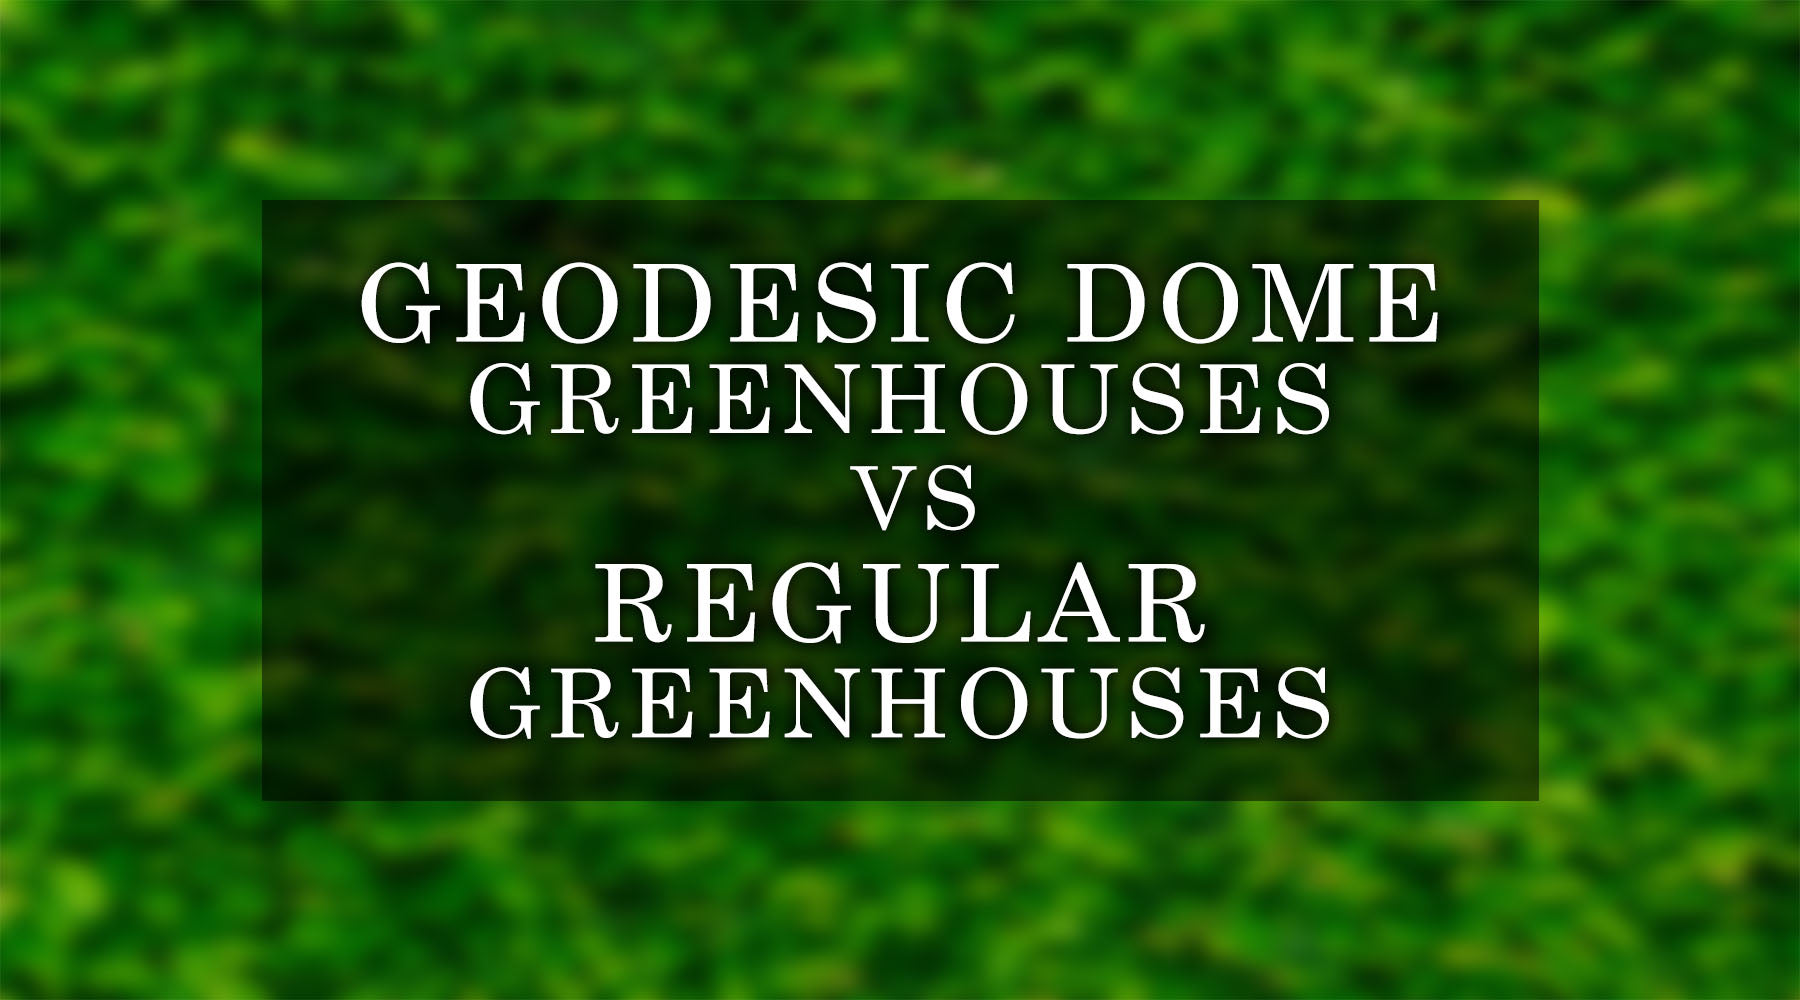 Geodesic Dome Greenhouses vs Regular Greenhouses: A Detailed Comparison